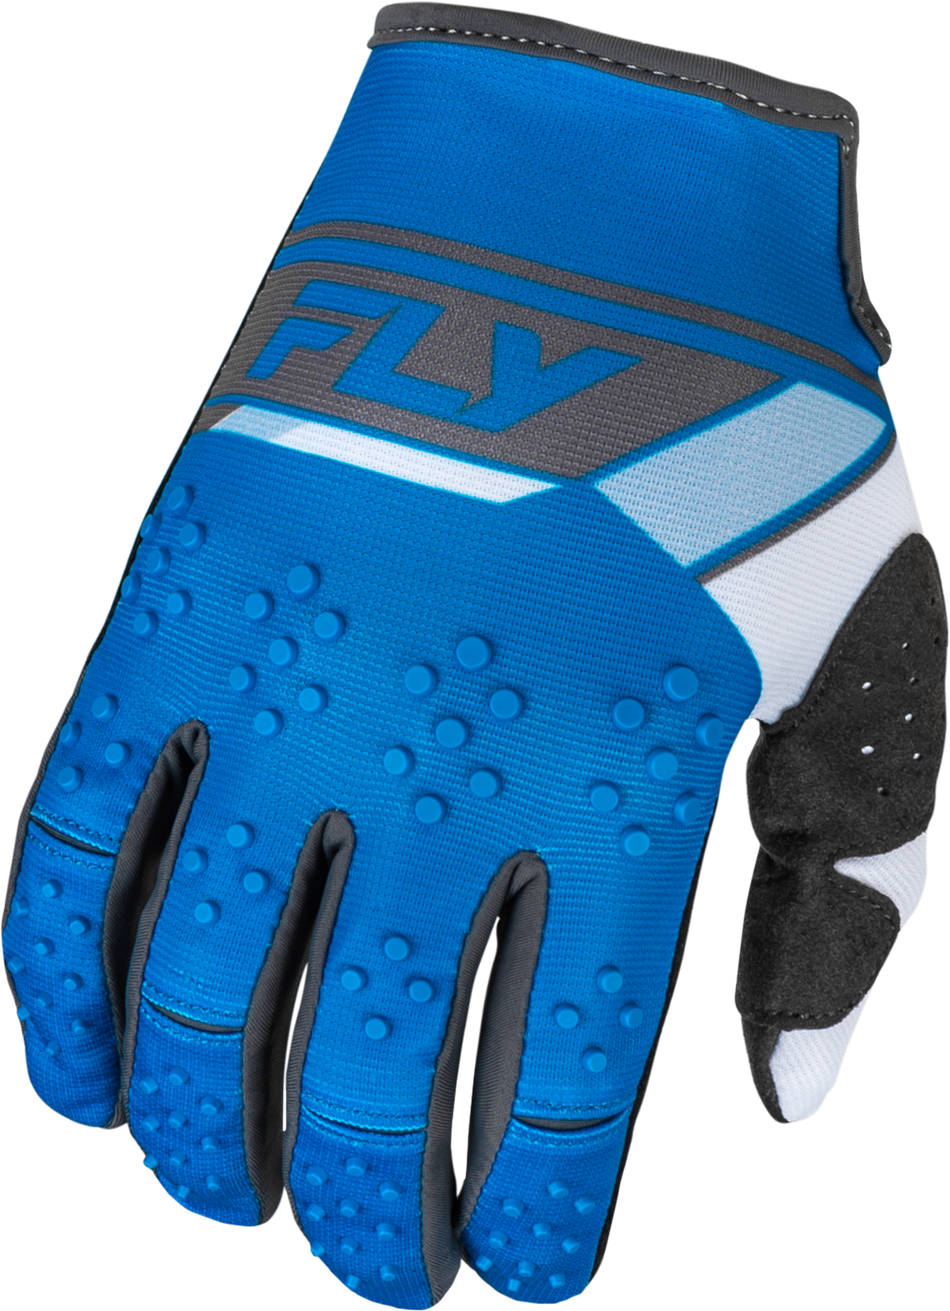 FLY RACING Kinetic Prix Gloves Bright Blue/Charcoal Lg 377-410L